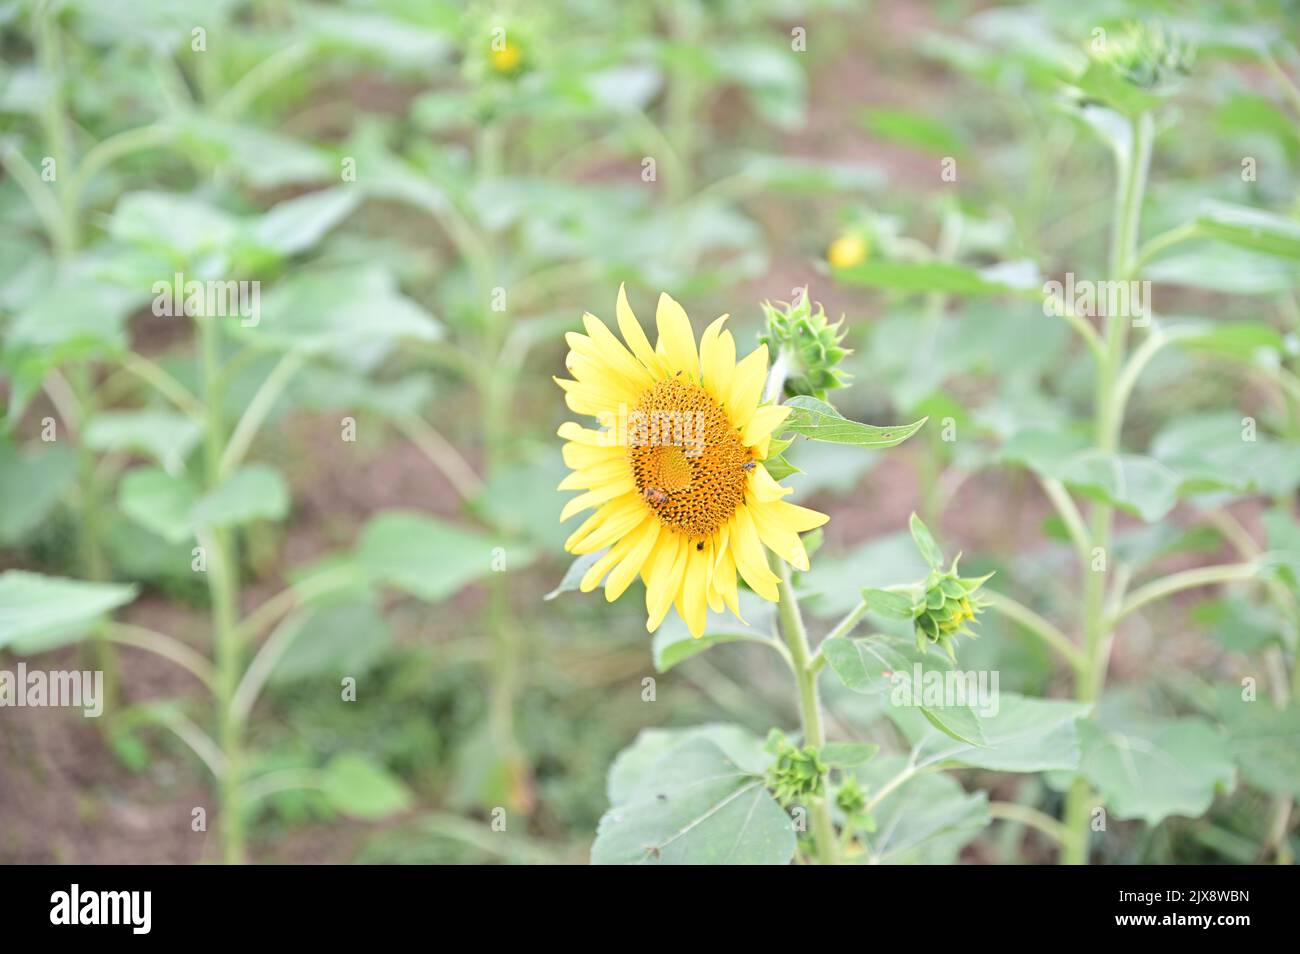 Sunflowers bloom beautifully and bees sit on them Stock Photo